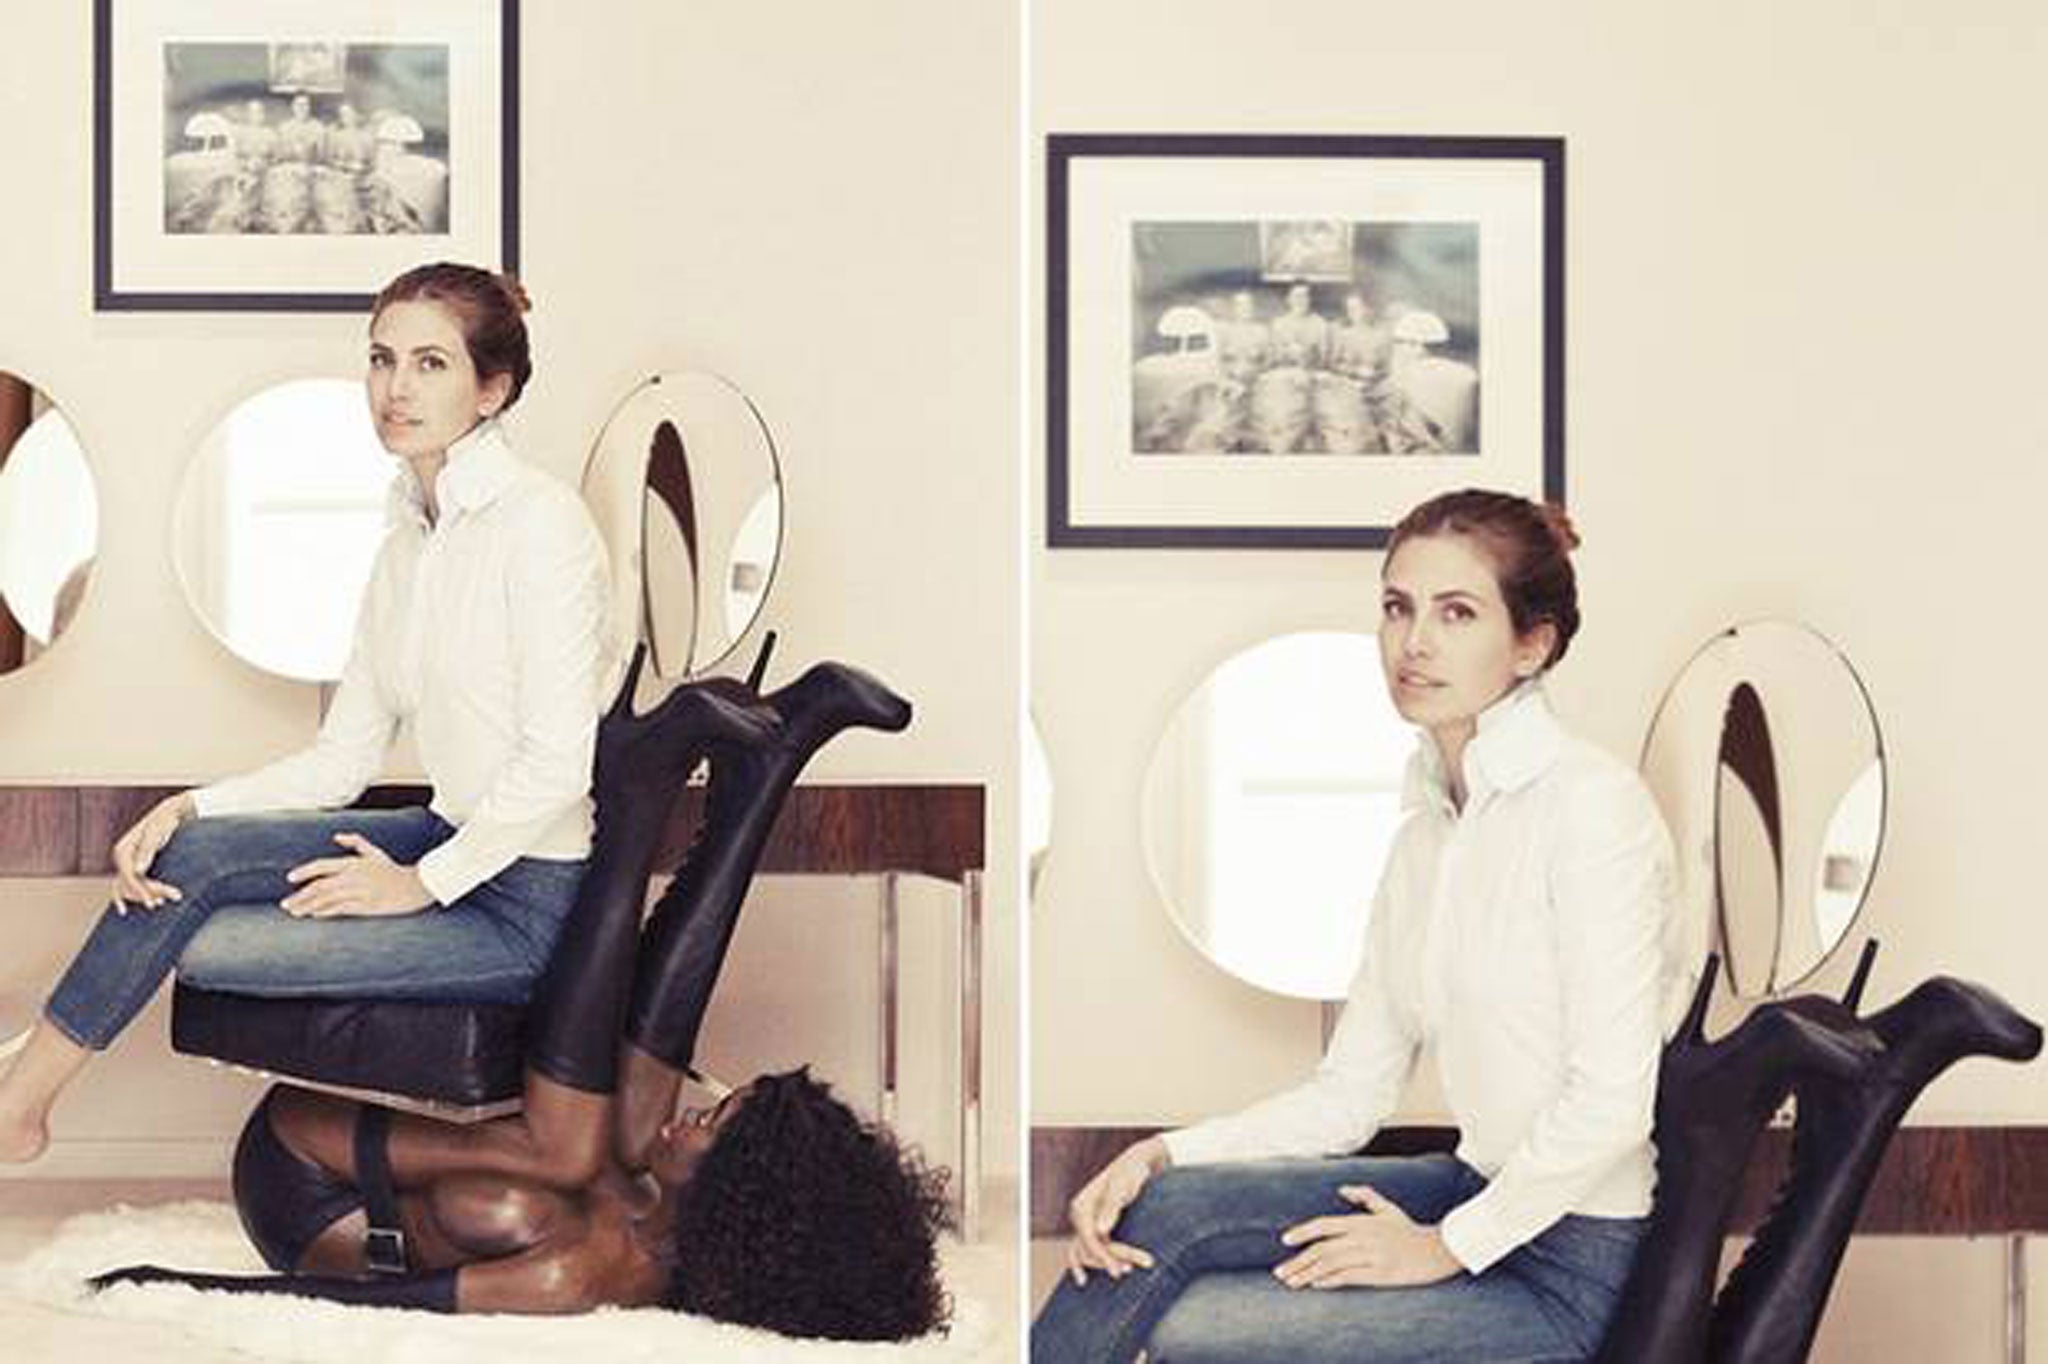 Dasha Zhukova was pictured sat on a black female mannequin during a photoshoot for Buro 24/7. The image was later cropped